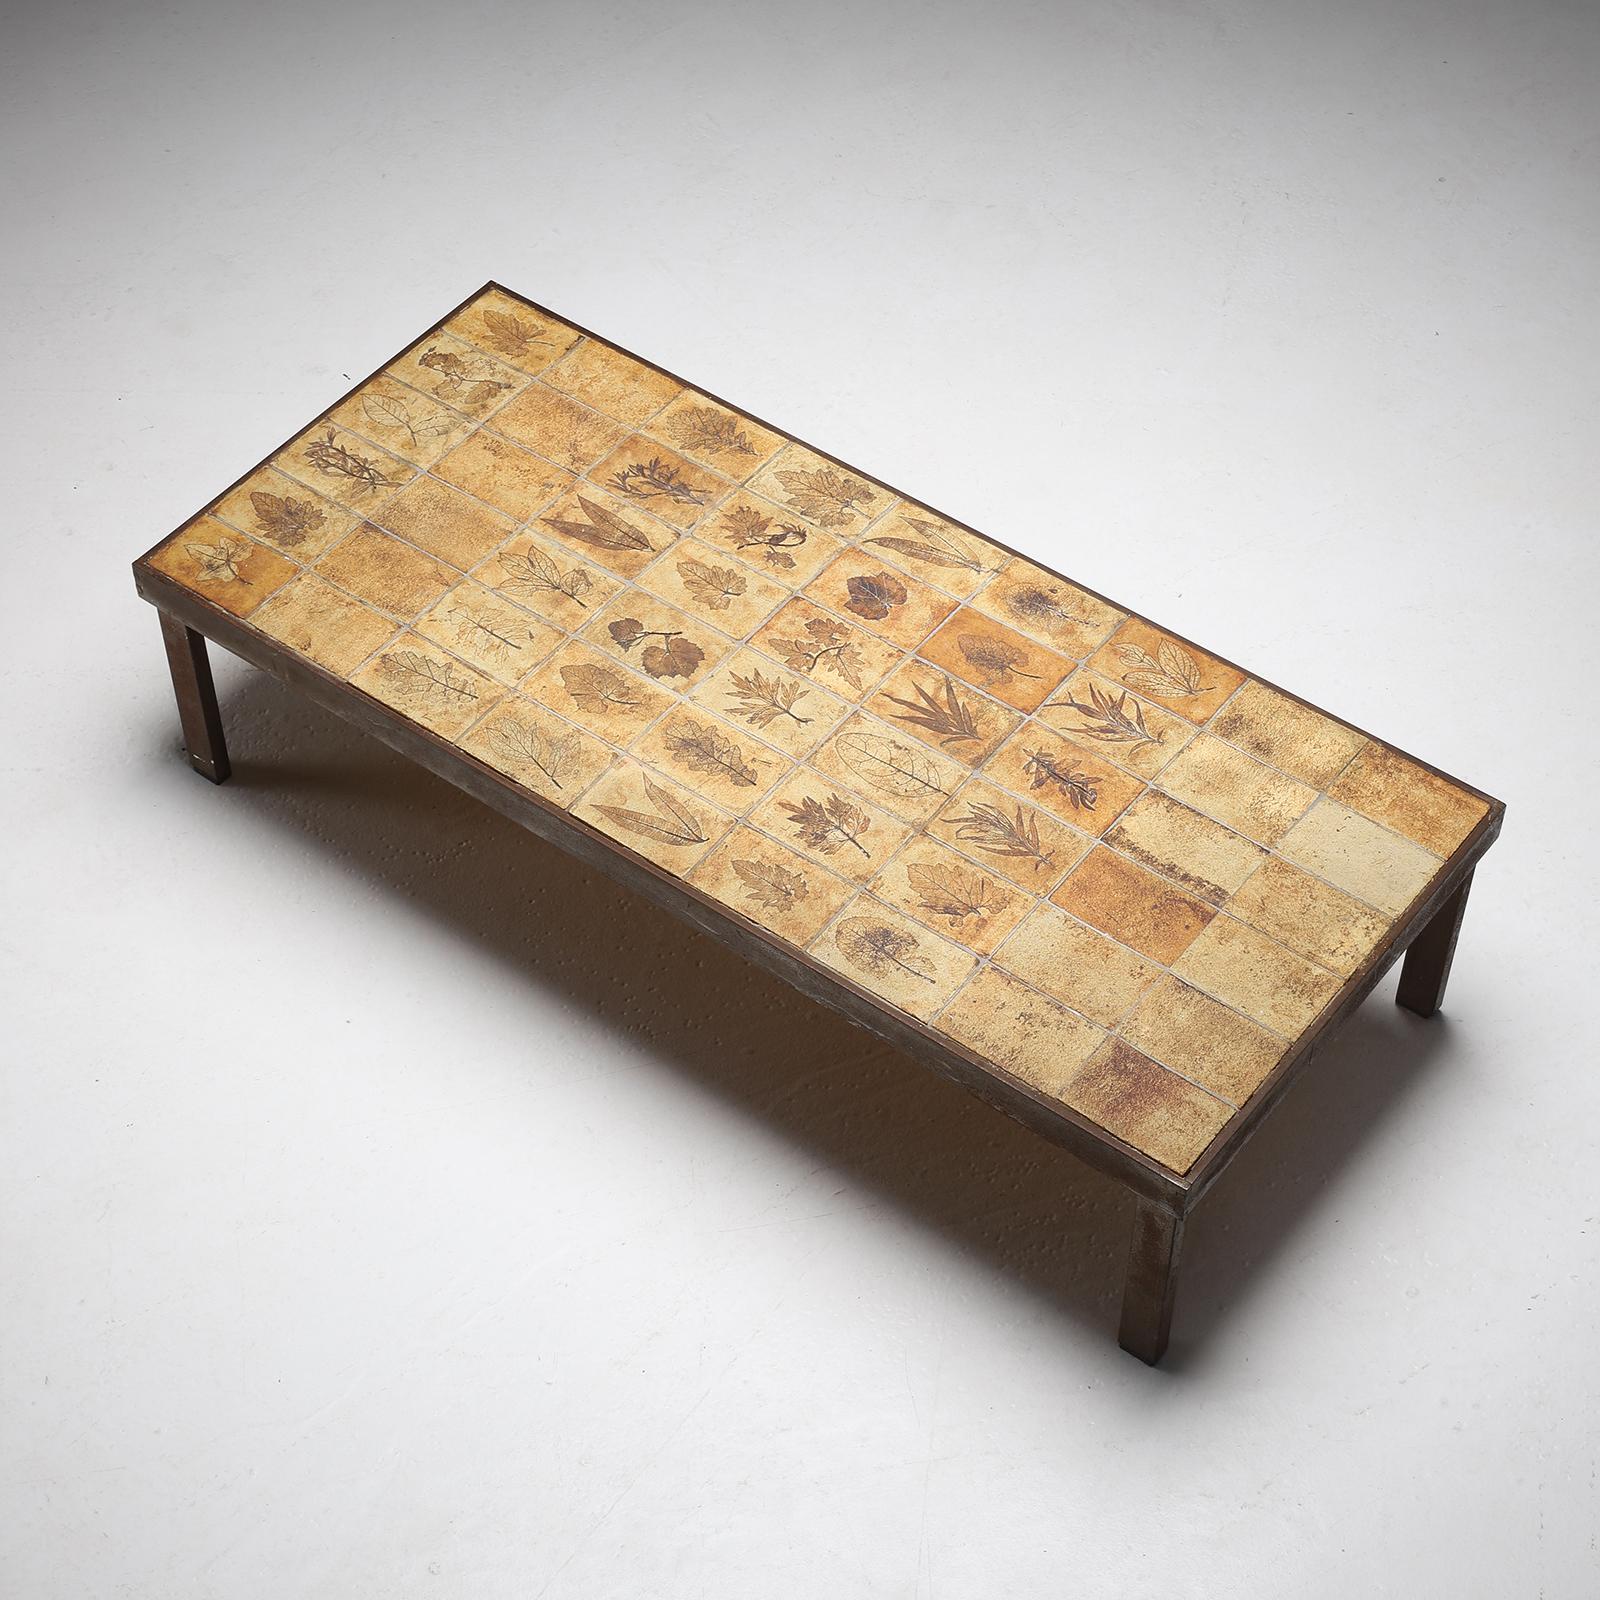 French ceramic coffee table by Roger Capron dating from the 1960s Vallauris, France.